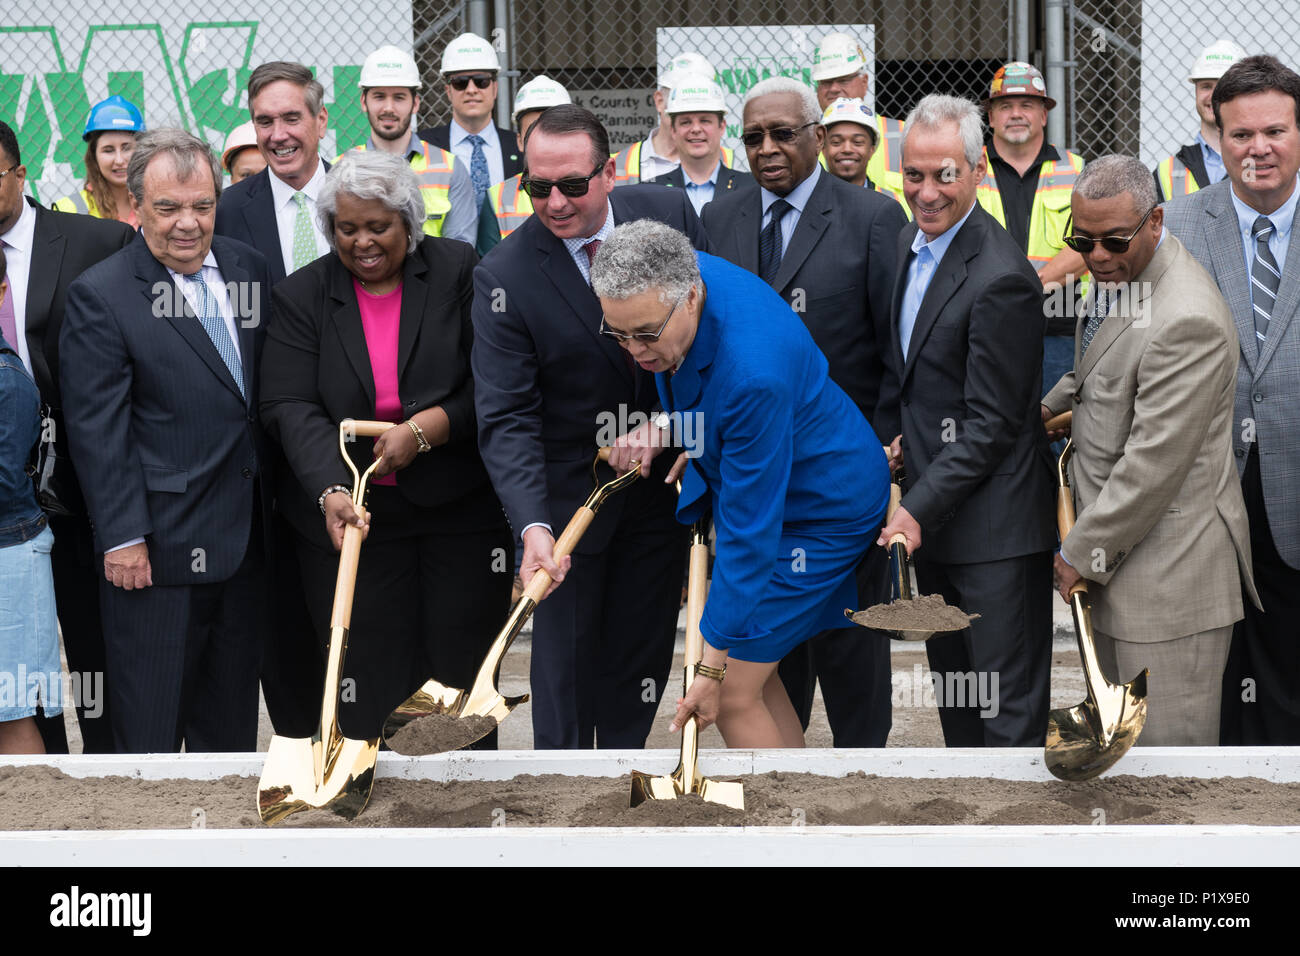 Attendees at the groundbreaking ceremony for the redevelopment of Cook County Hospital including Toni Preckwinkle and Rahm Emanuel Stock Photo